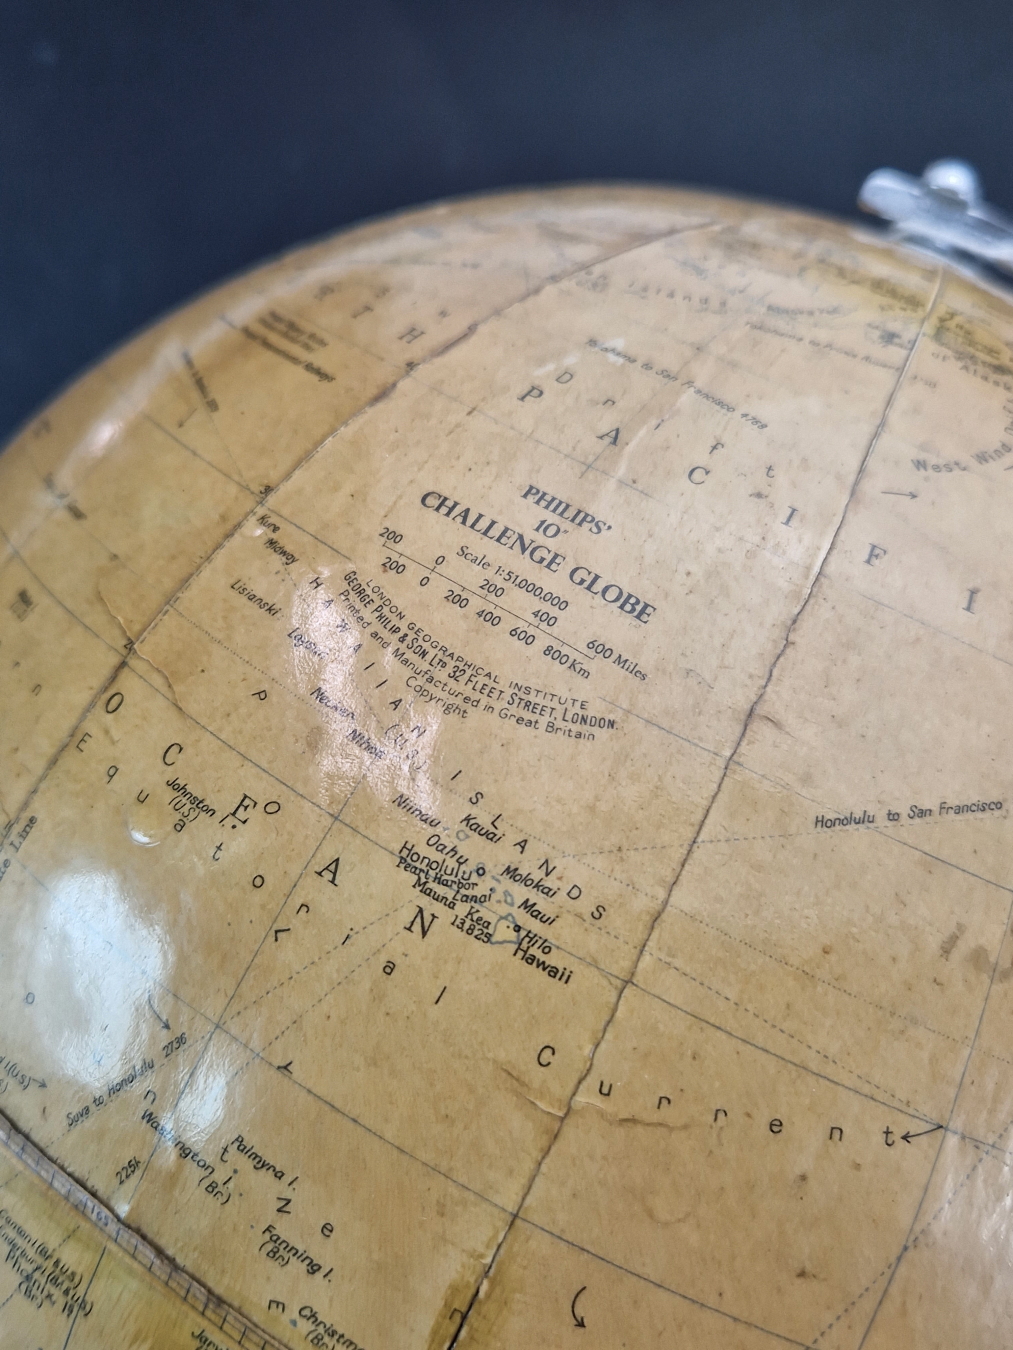 A 1961 PHILIPS CHALLENGE TERRESTRIAL GLOBE ON AN EBONISED STAND WITH A CIRCULAR FOOT. - Image 2 of 2